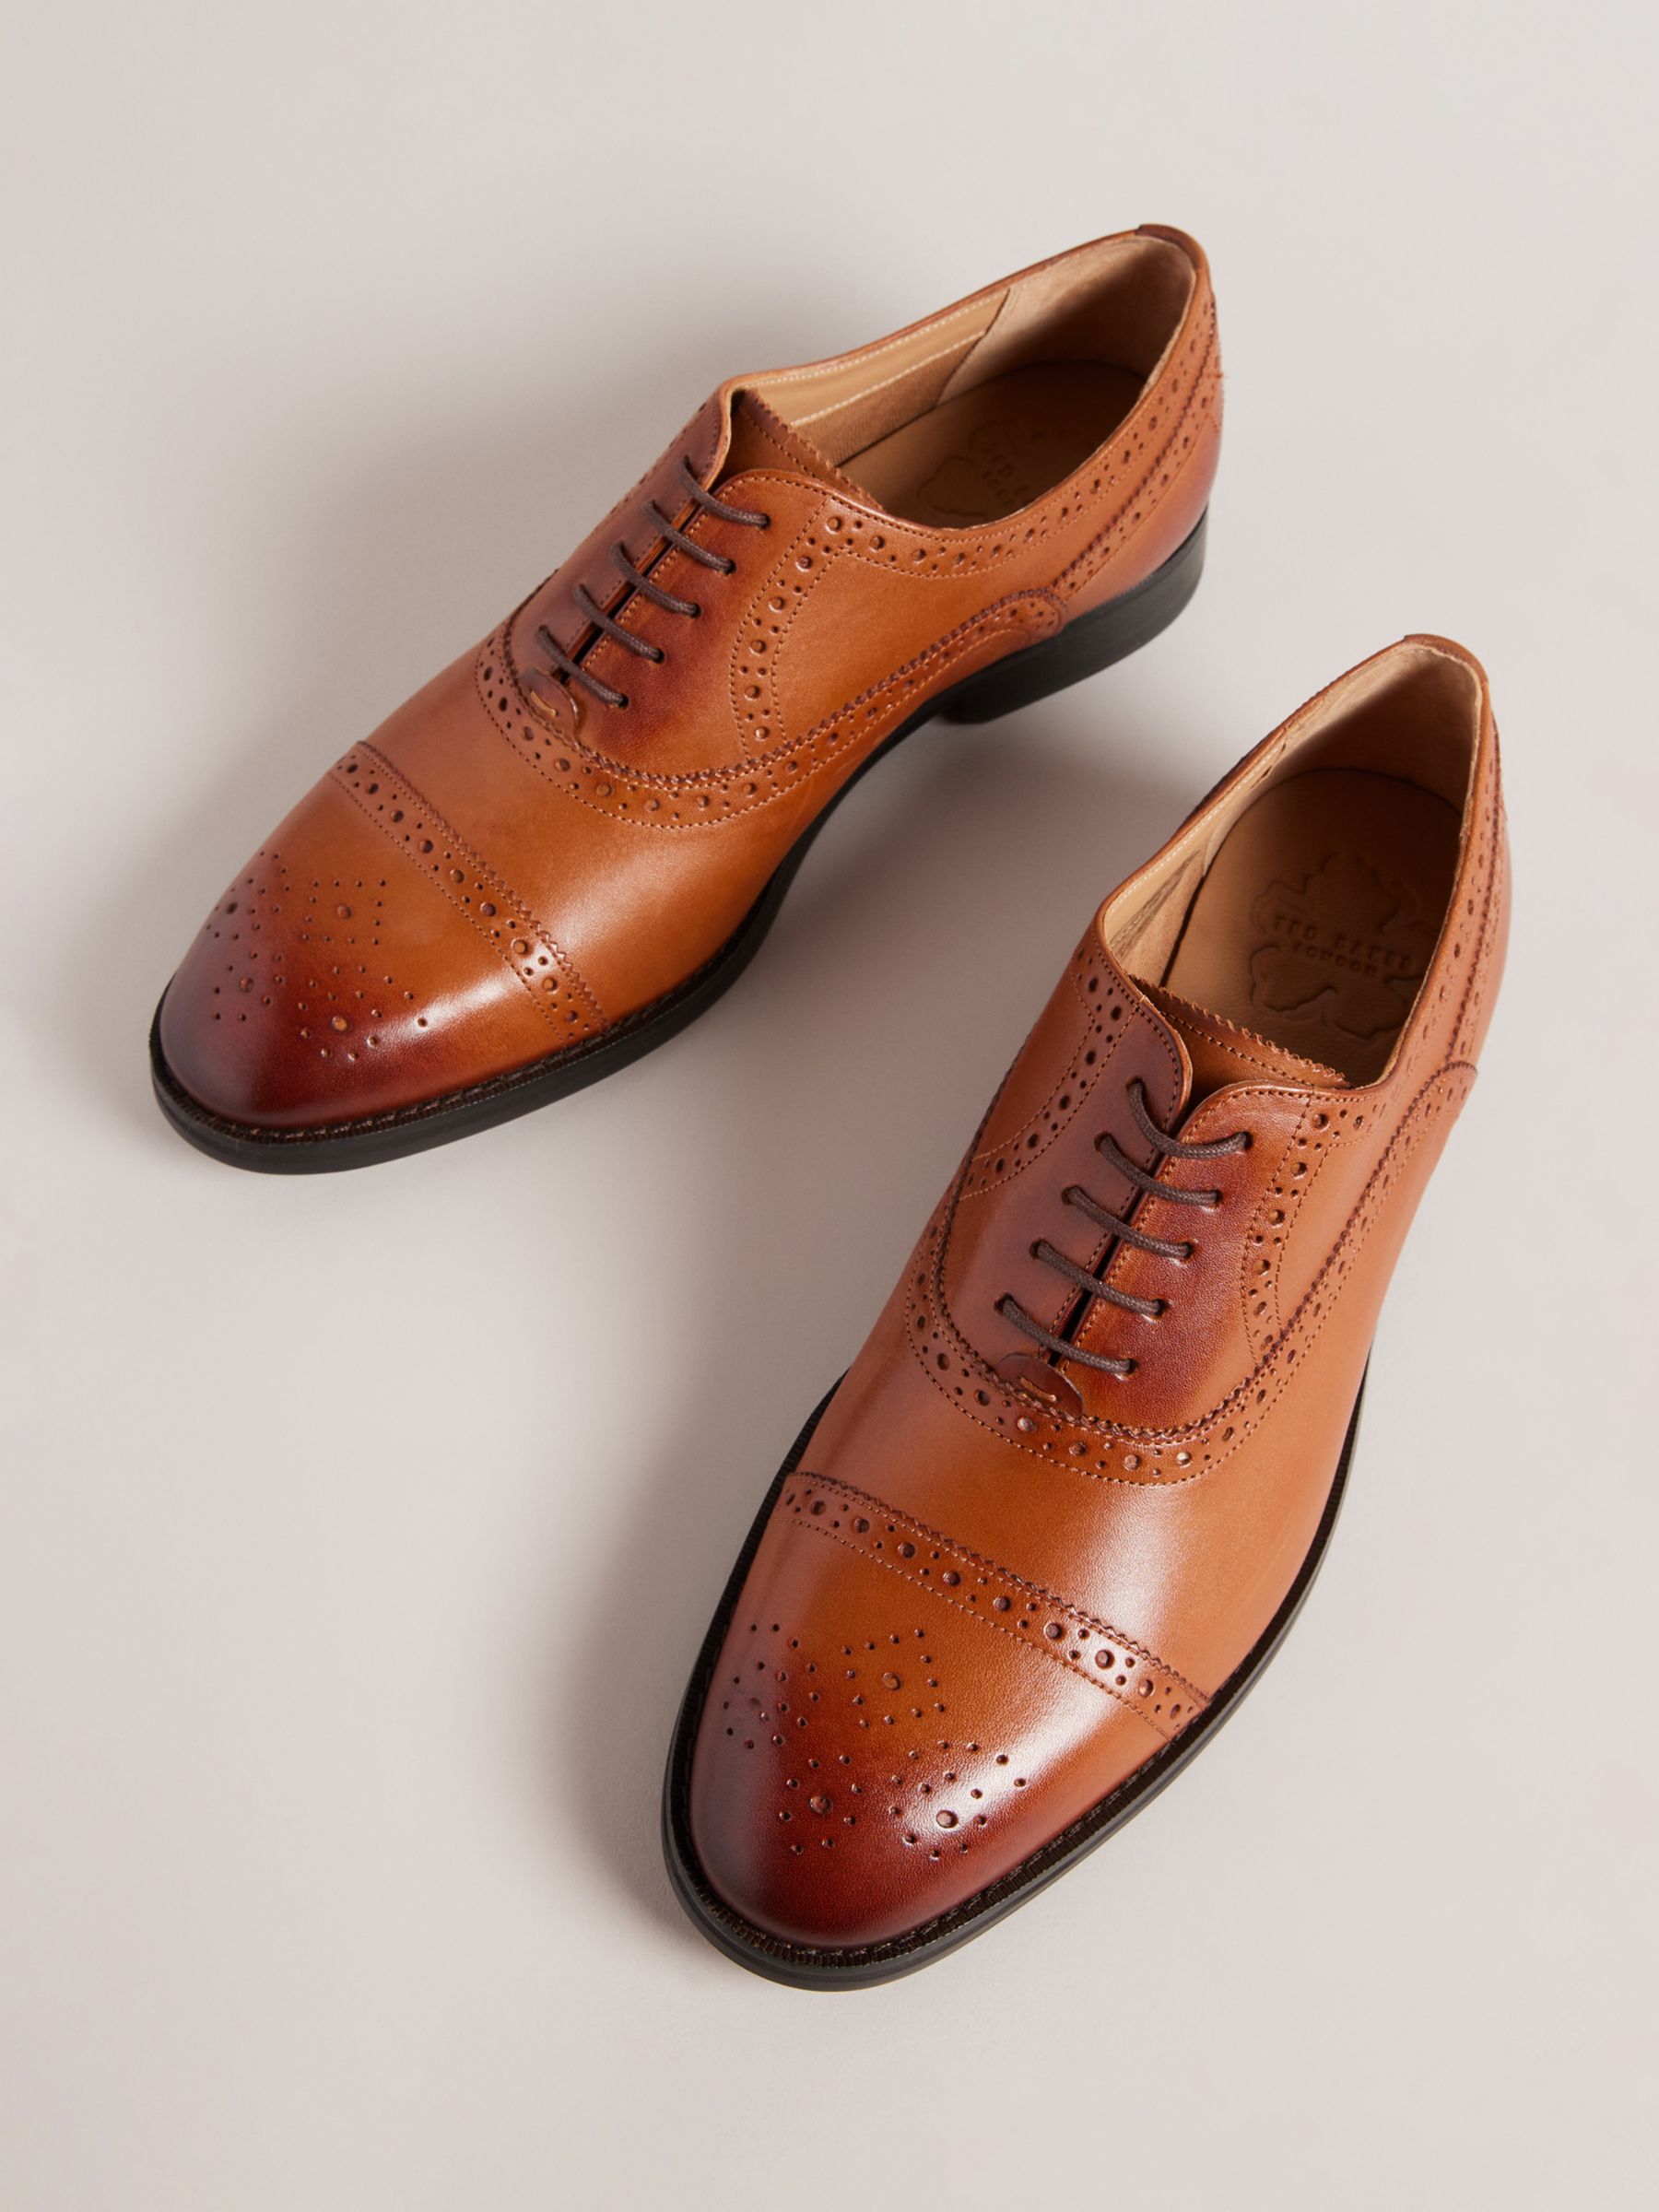 Ted Baker Arnie Leather Oxford Brogues, Tan, EU41